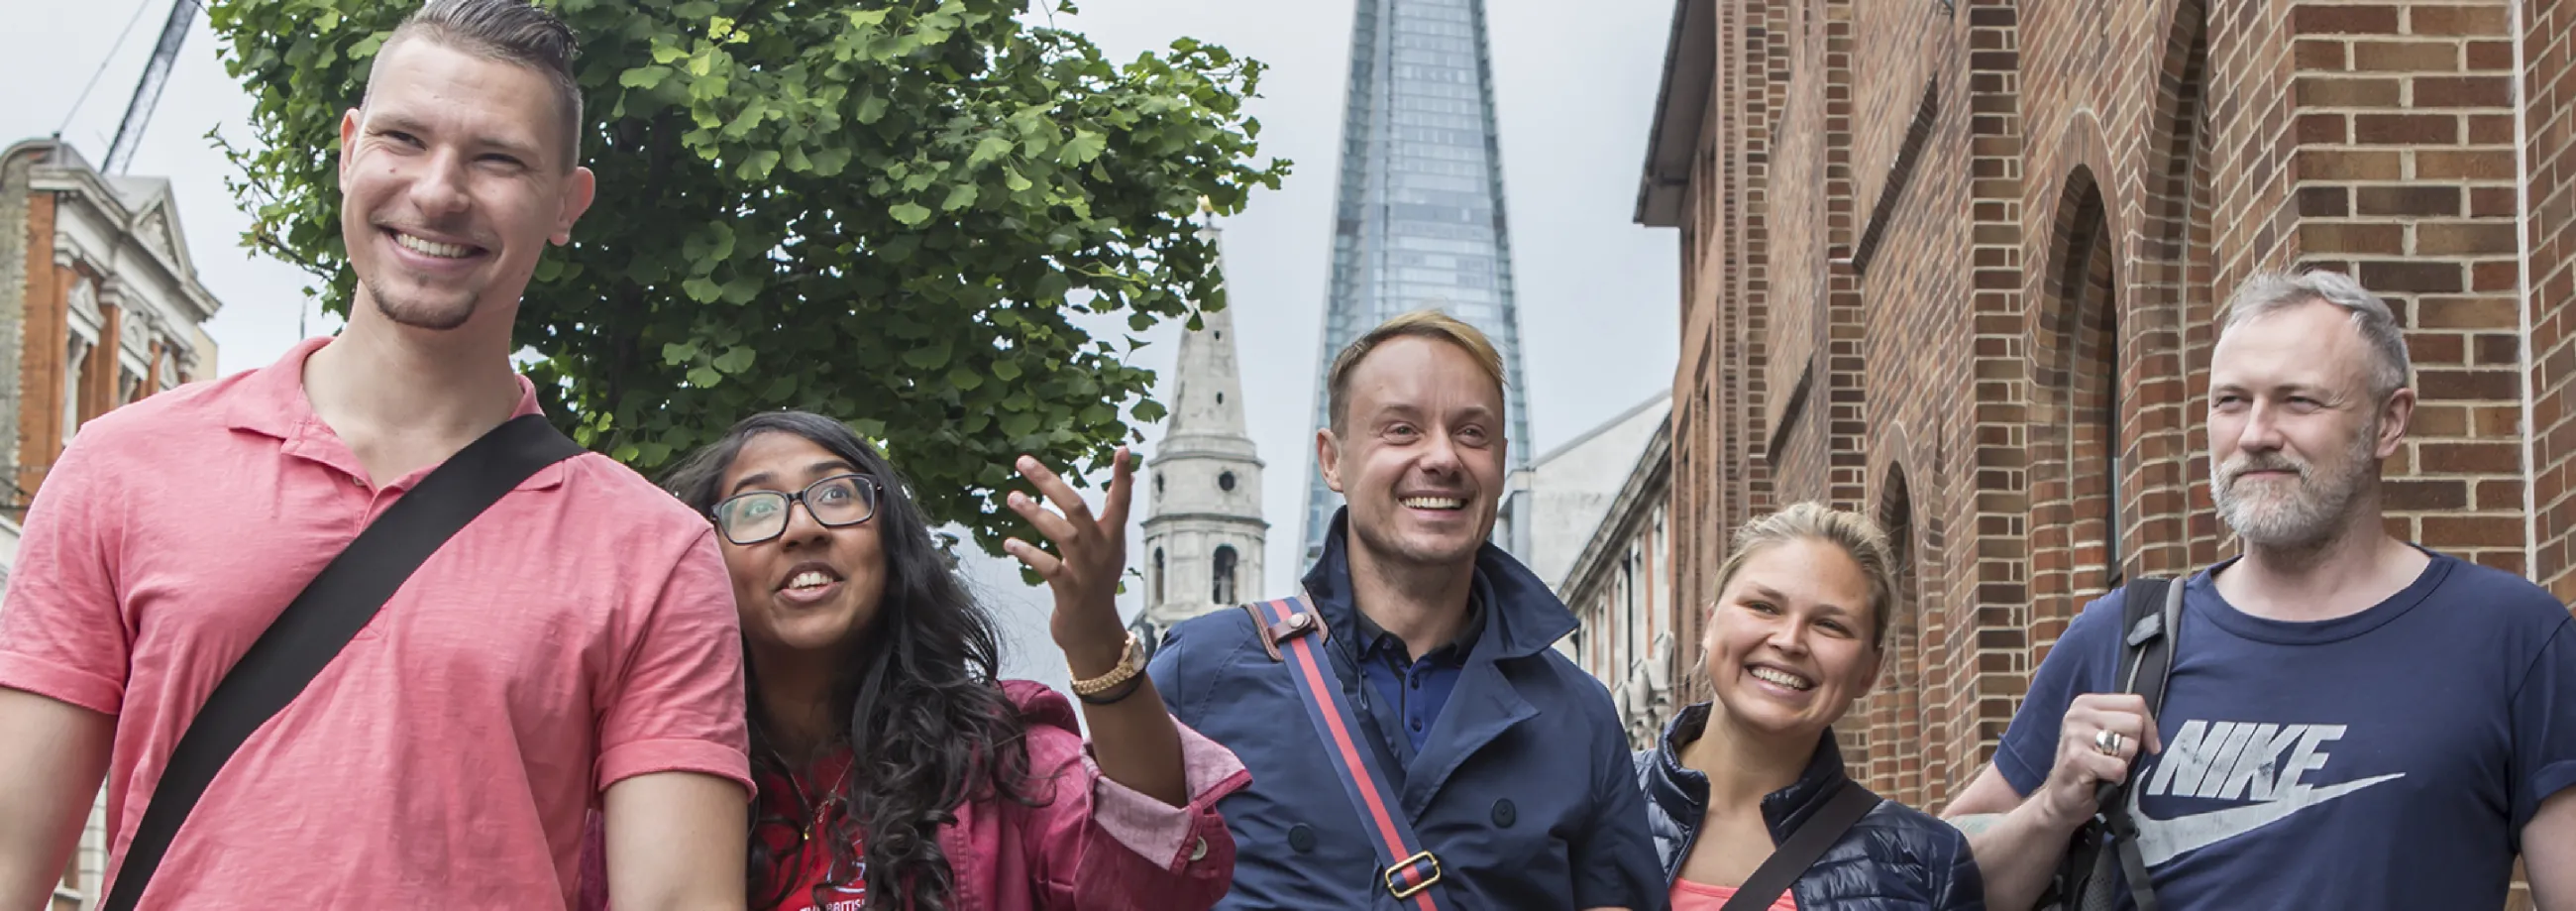 Photography commissioned as part of the rebrand – Students from the University College of Osteopathy walking along the street in London, with the Shard behind them 